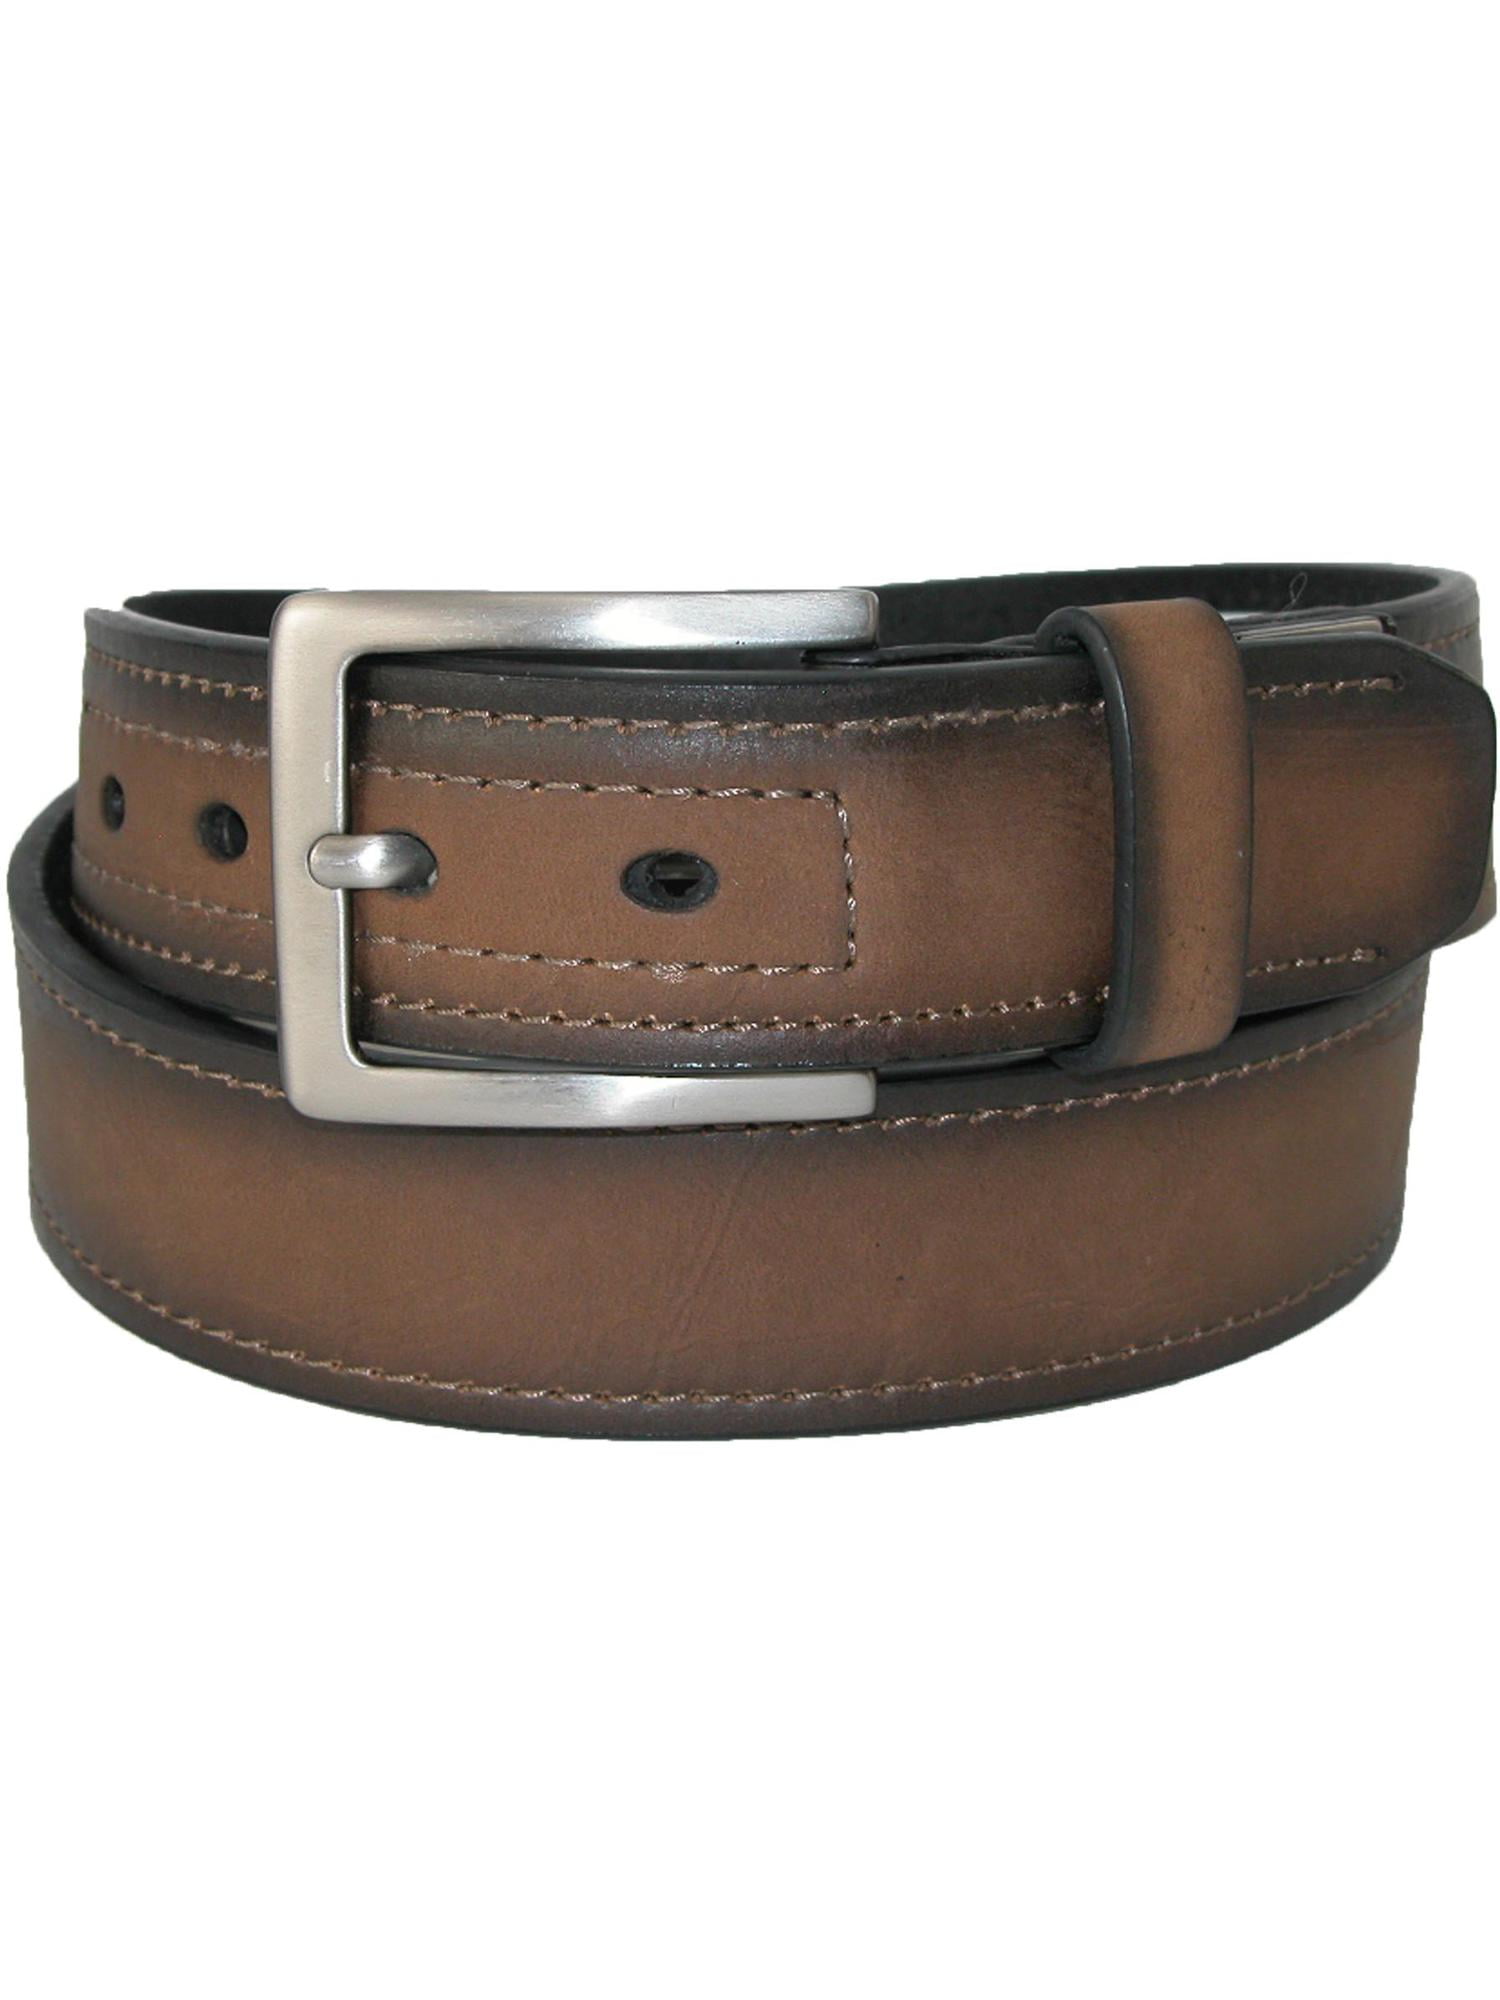 Buy Industrial Strength Logo Belt Online at Lowest Price in India. 48234455